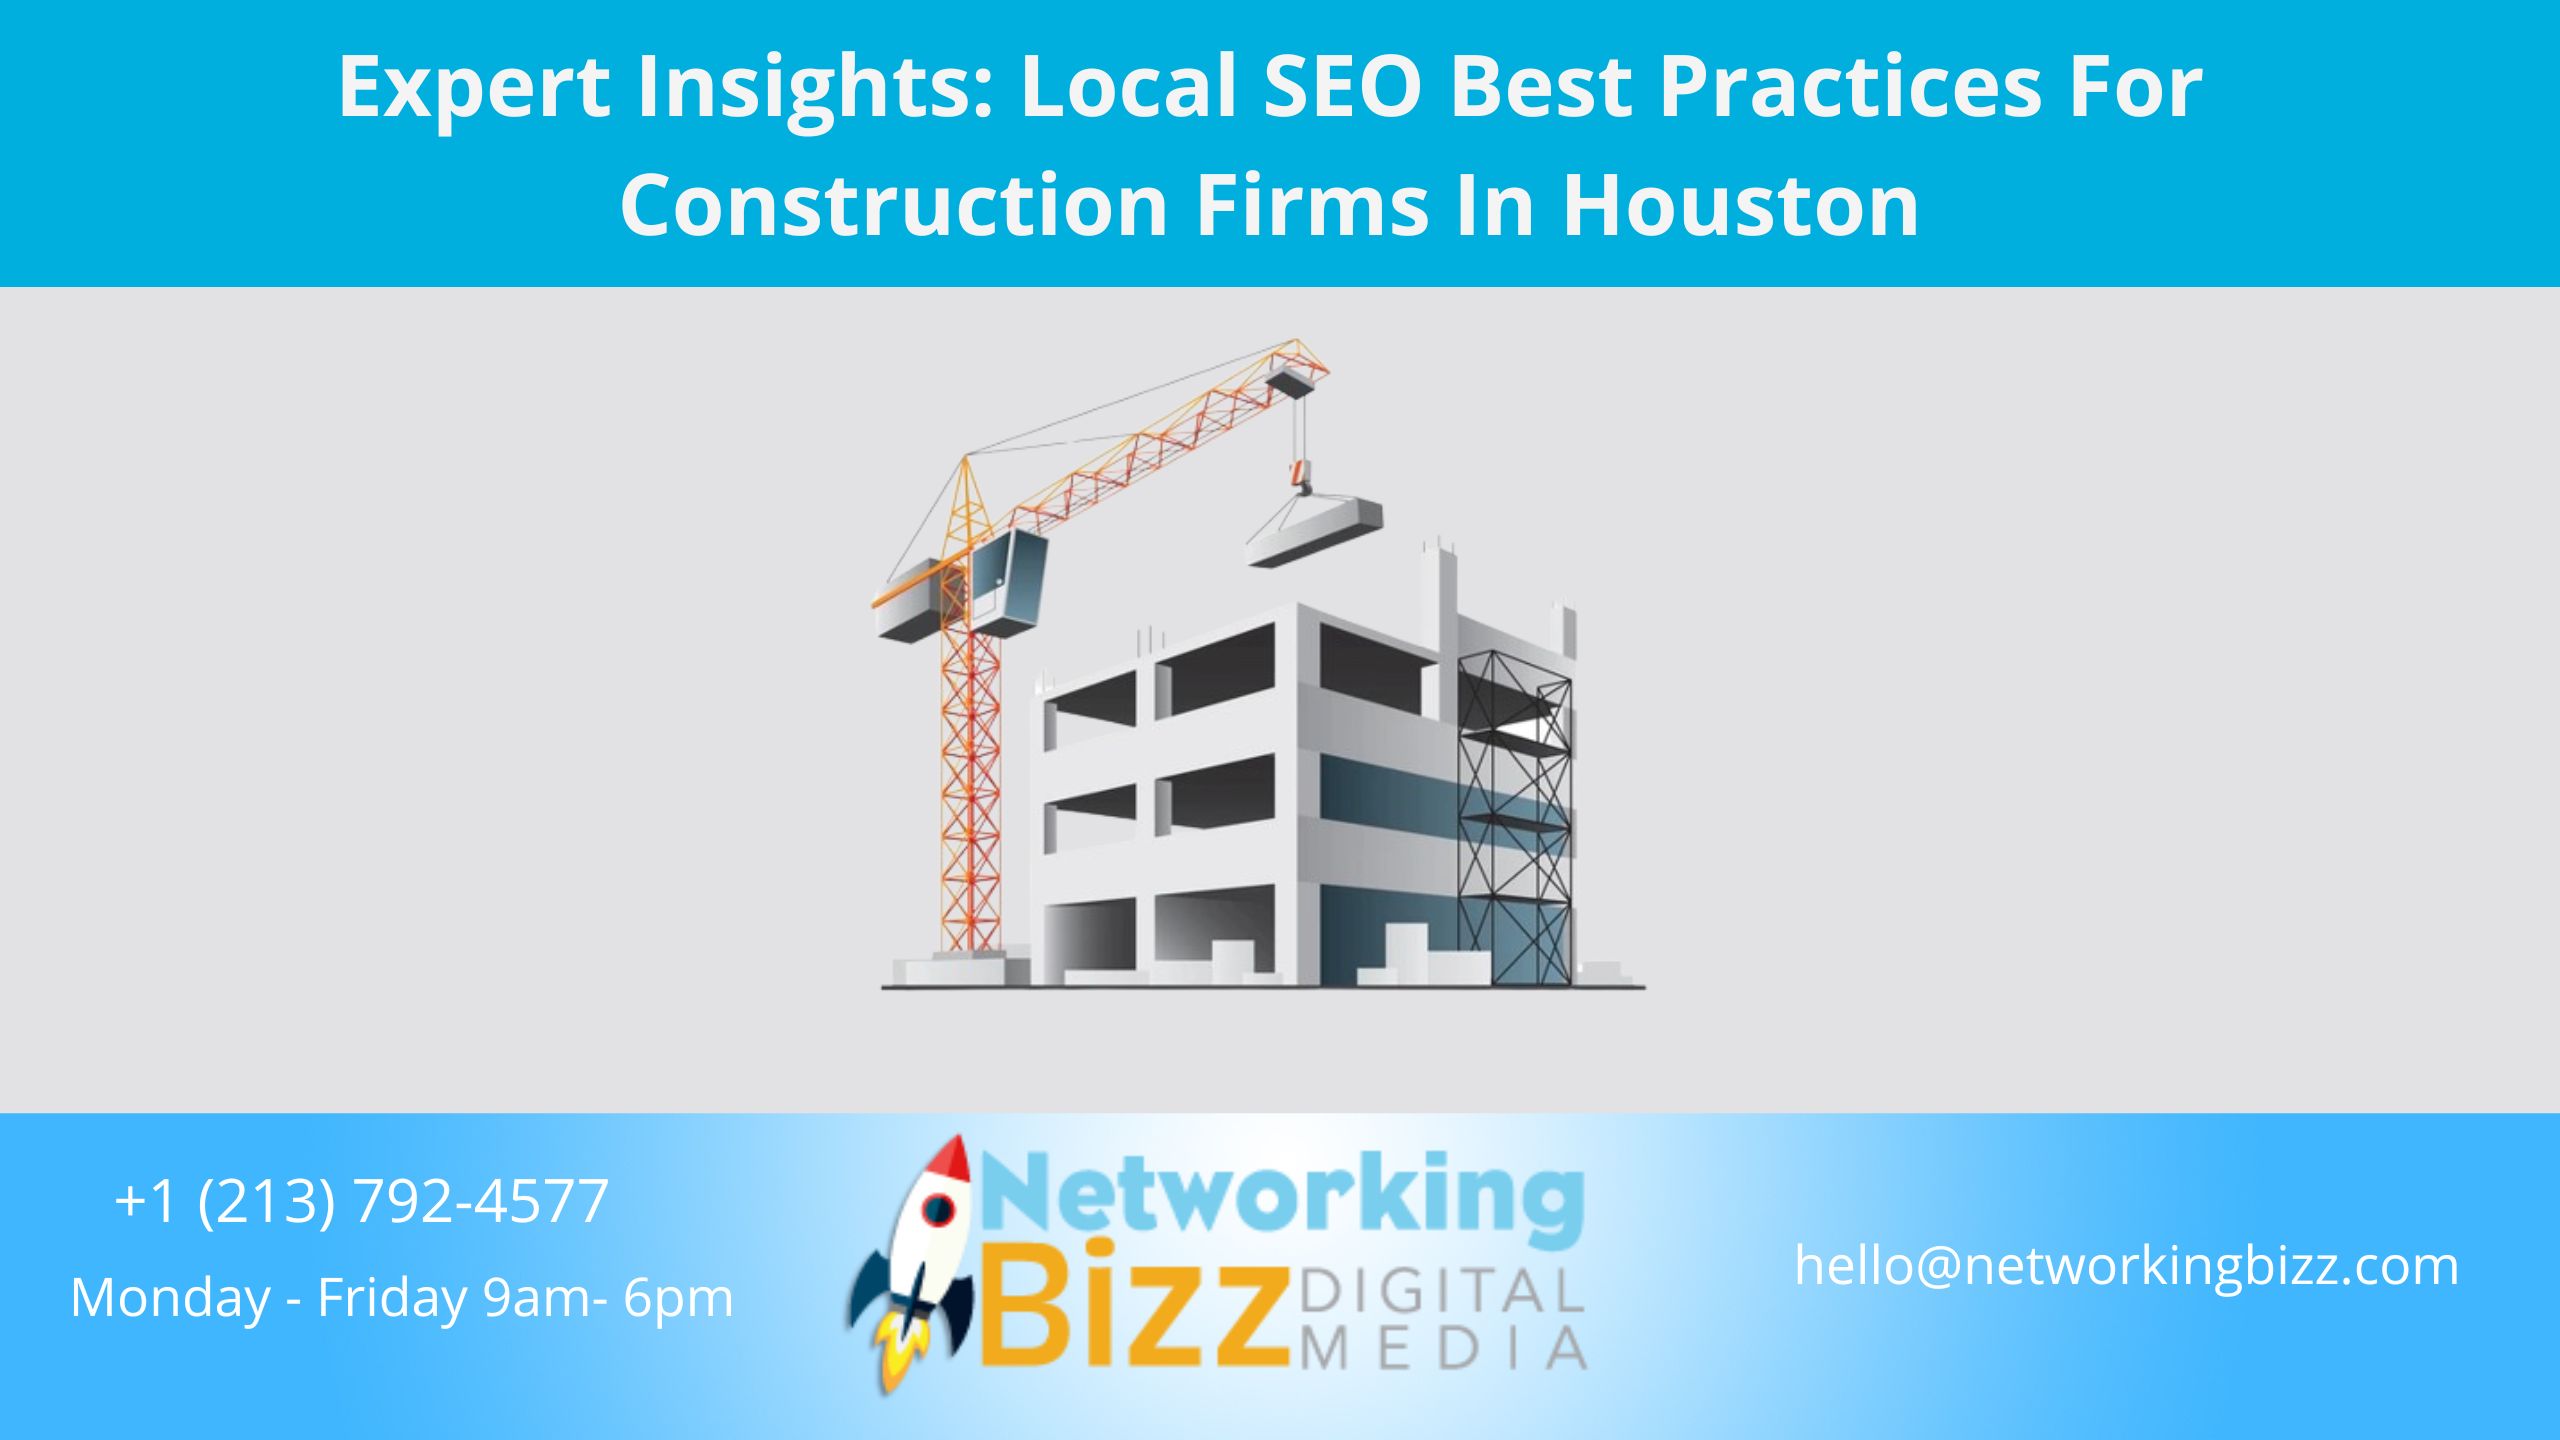 Expert Insights: Local SEO Best Practices For Construction Firms In Houston 